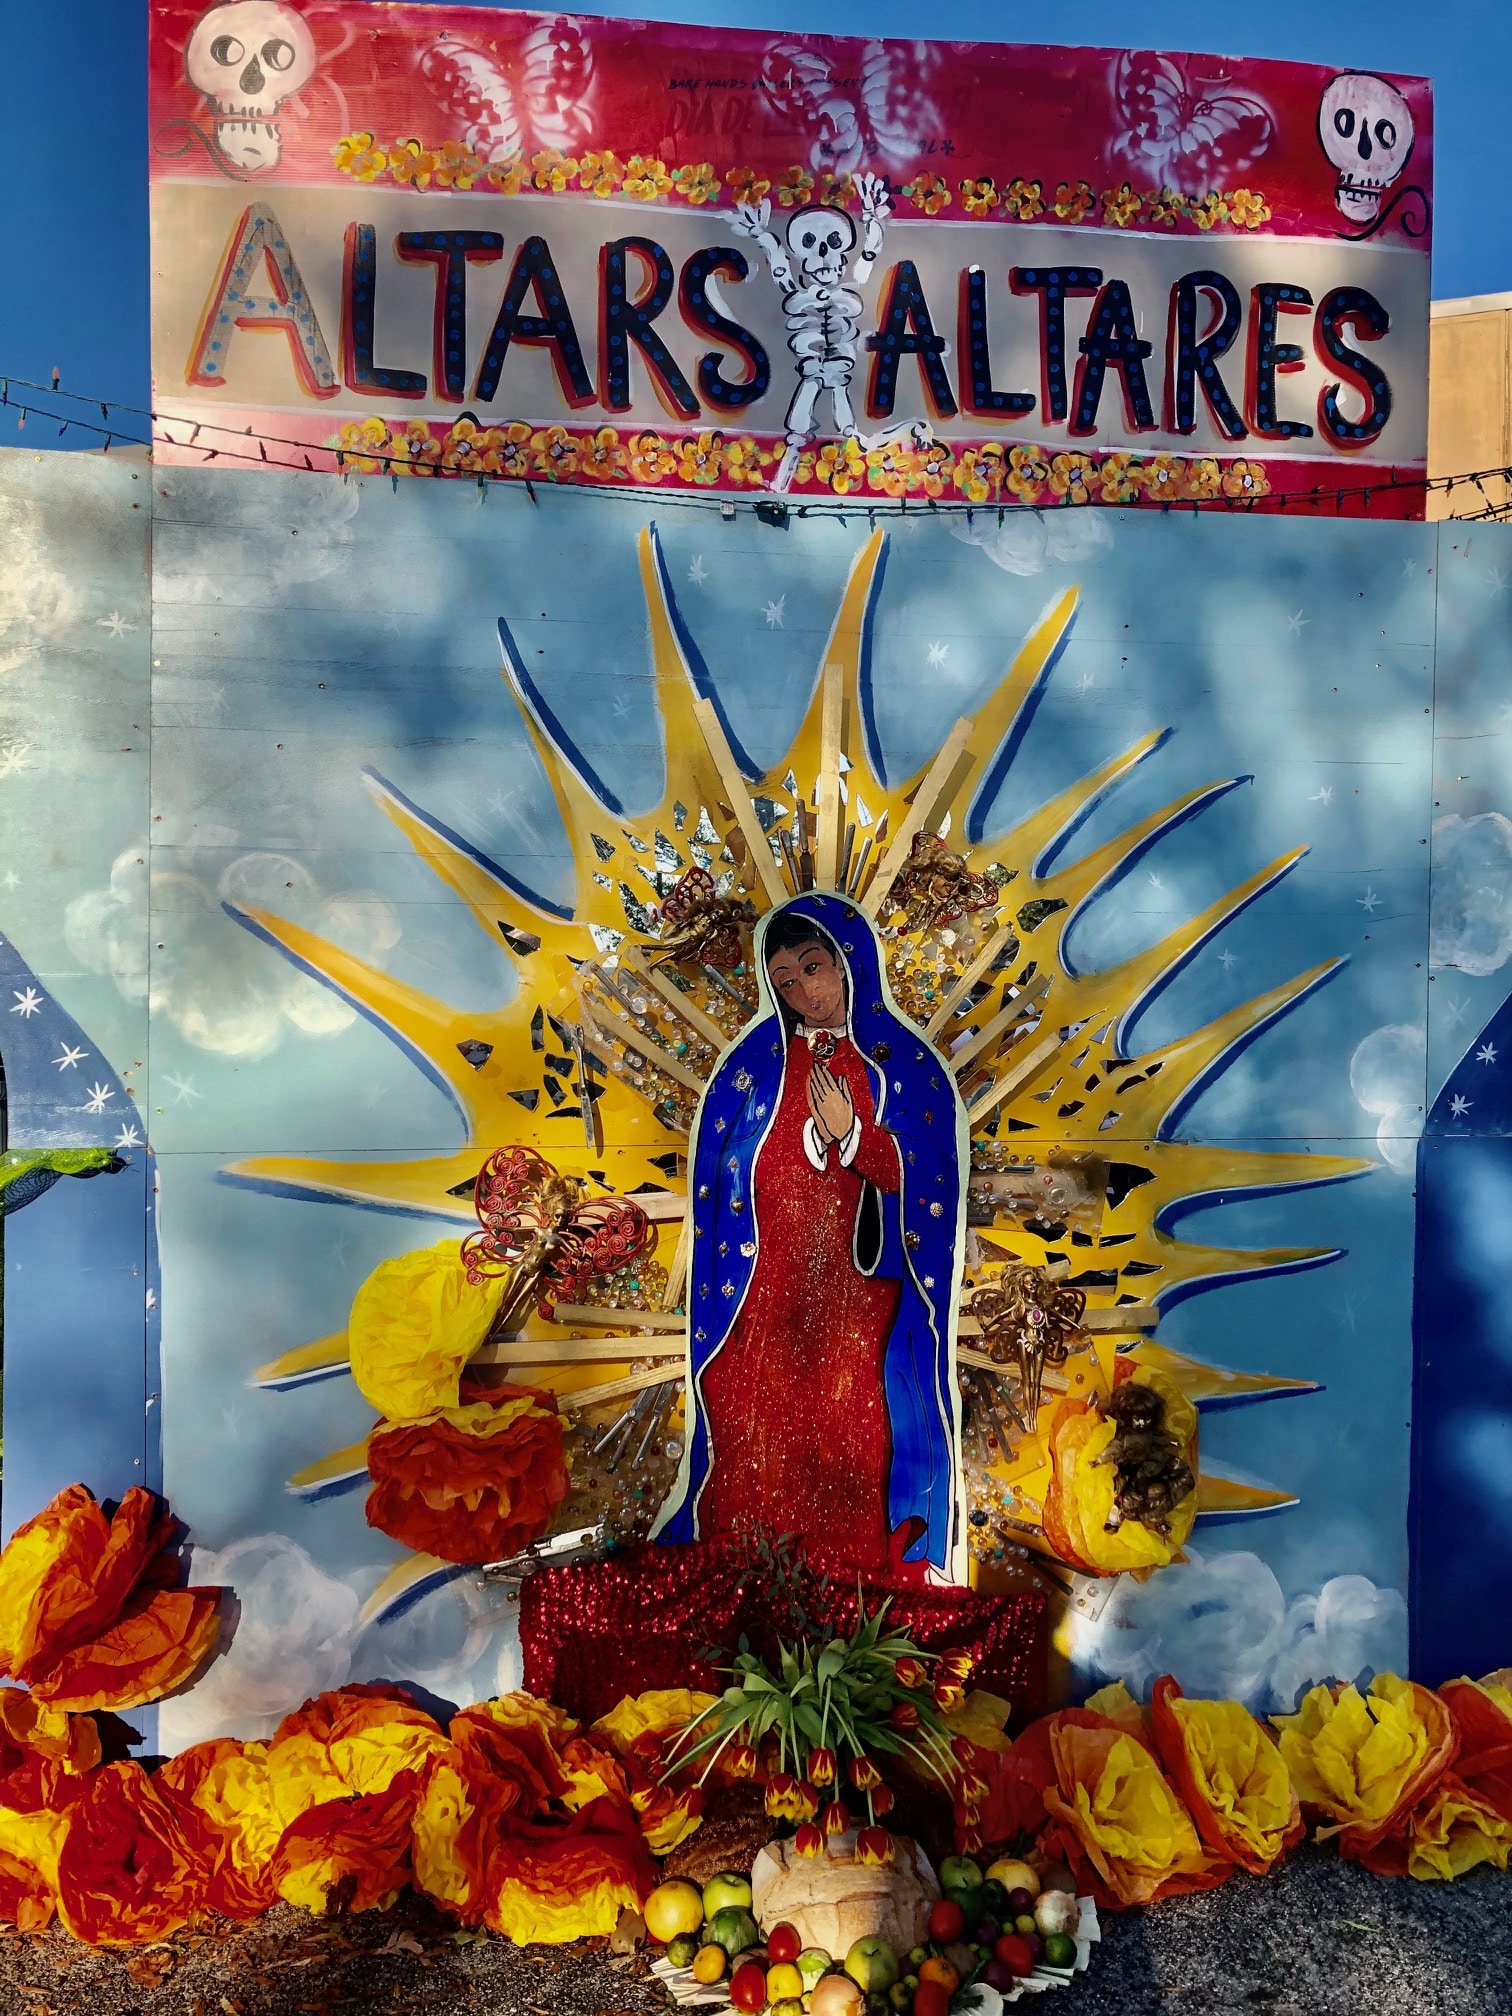 Day of the Dead 2 Discover amazing altars + more during Dia de los Muertos, Nov. 2-7 at Pepper Place